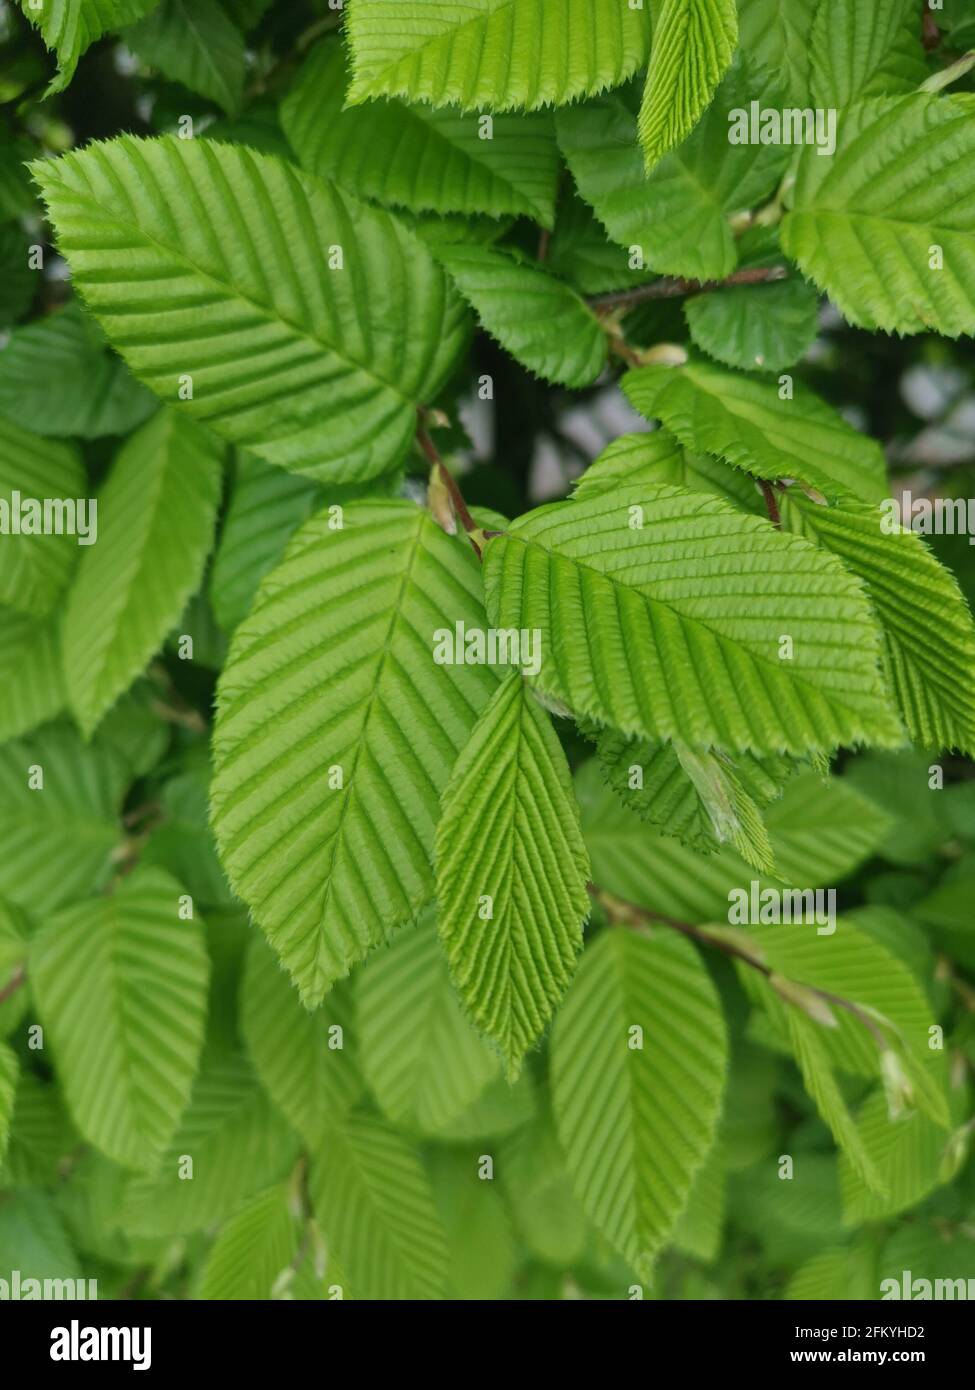 Carpinus betulus Leaf of a hornbeam used as wooden floorboards, parquet, living room furniture, instrument making Stock Photo